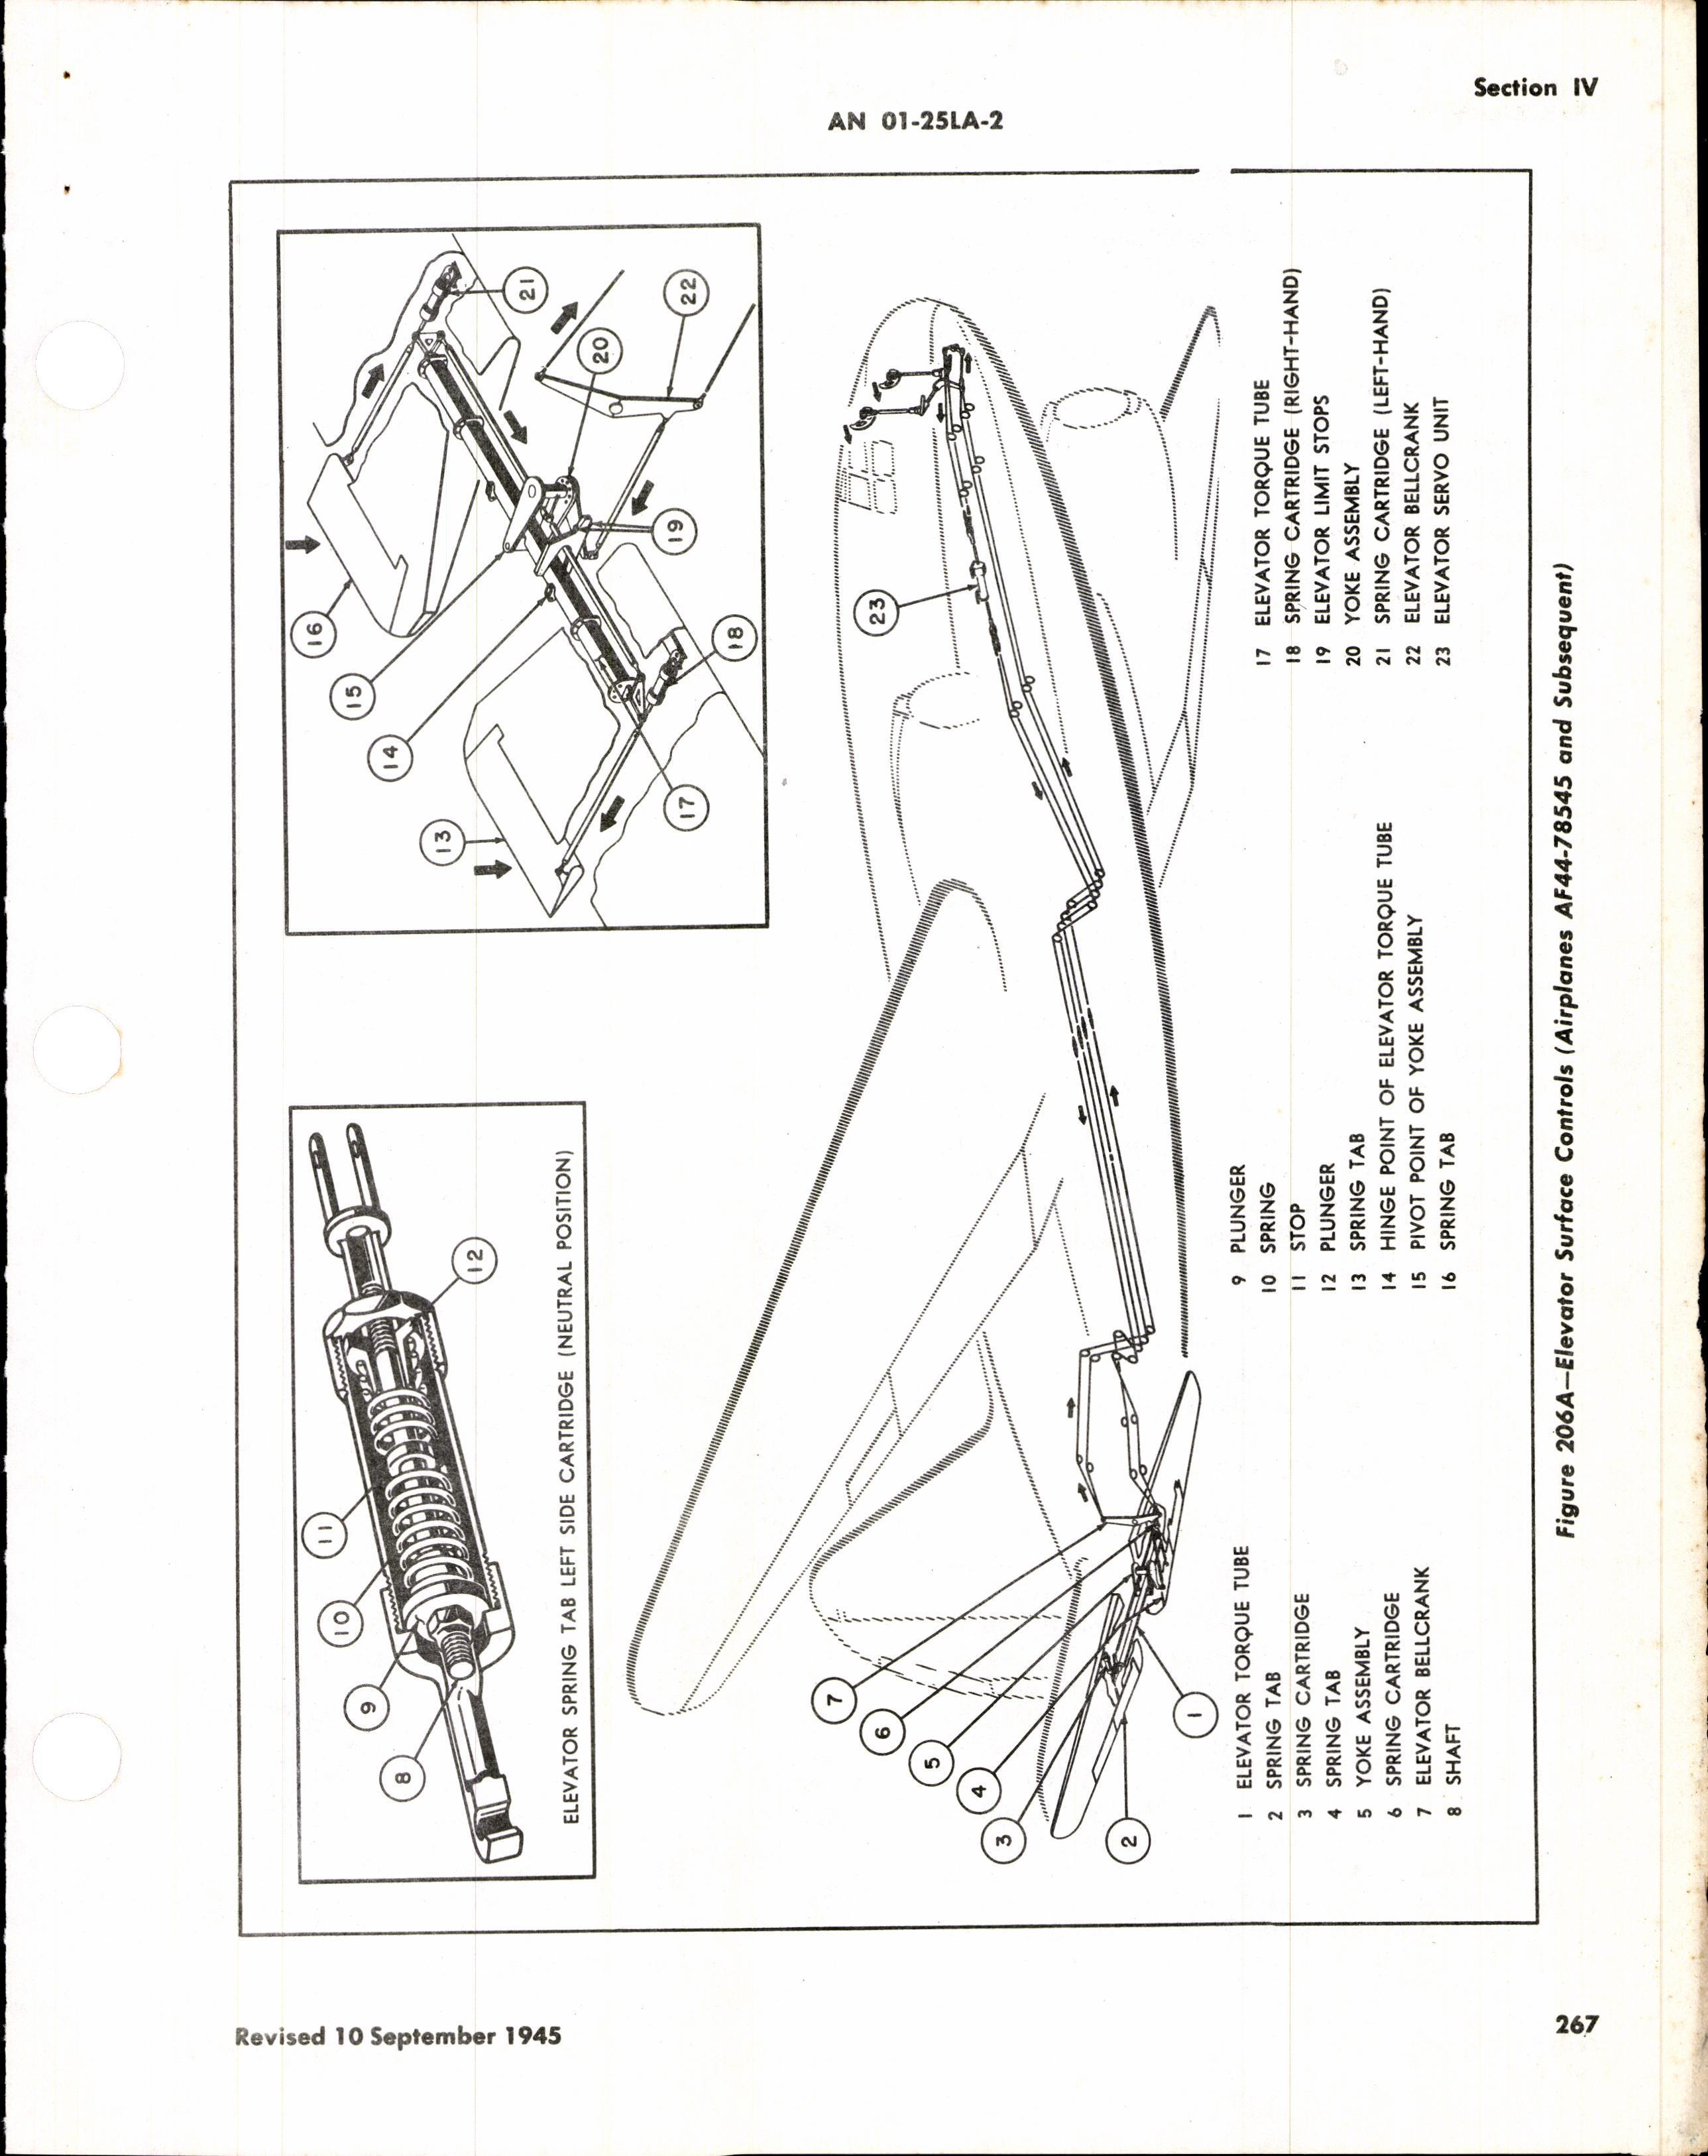 Sample page 7 from AirCorps Library document: Maintenance Instructions for C-46, ZC-46A, C-46D, C-46F & R5C-1